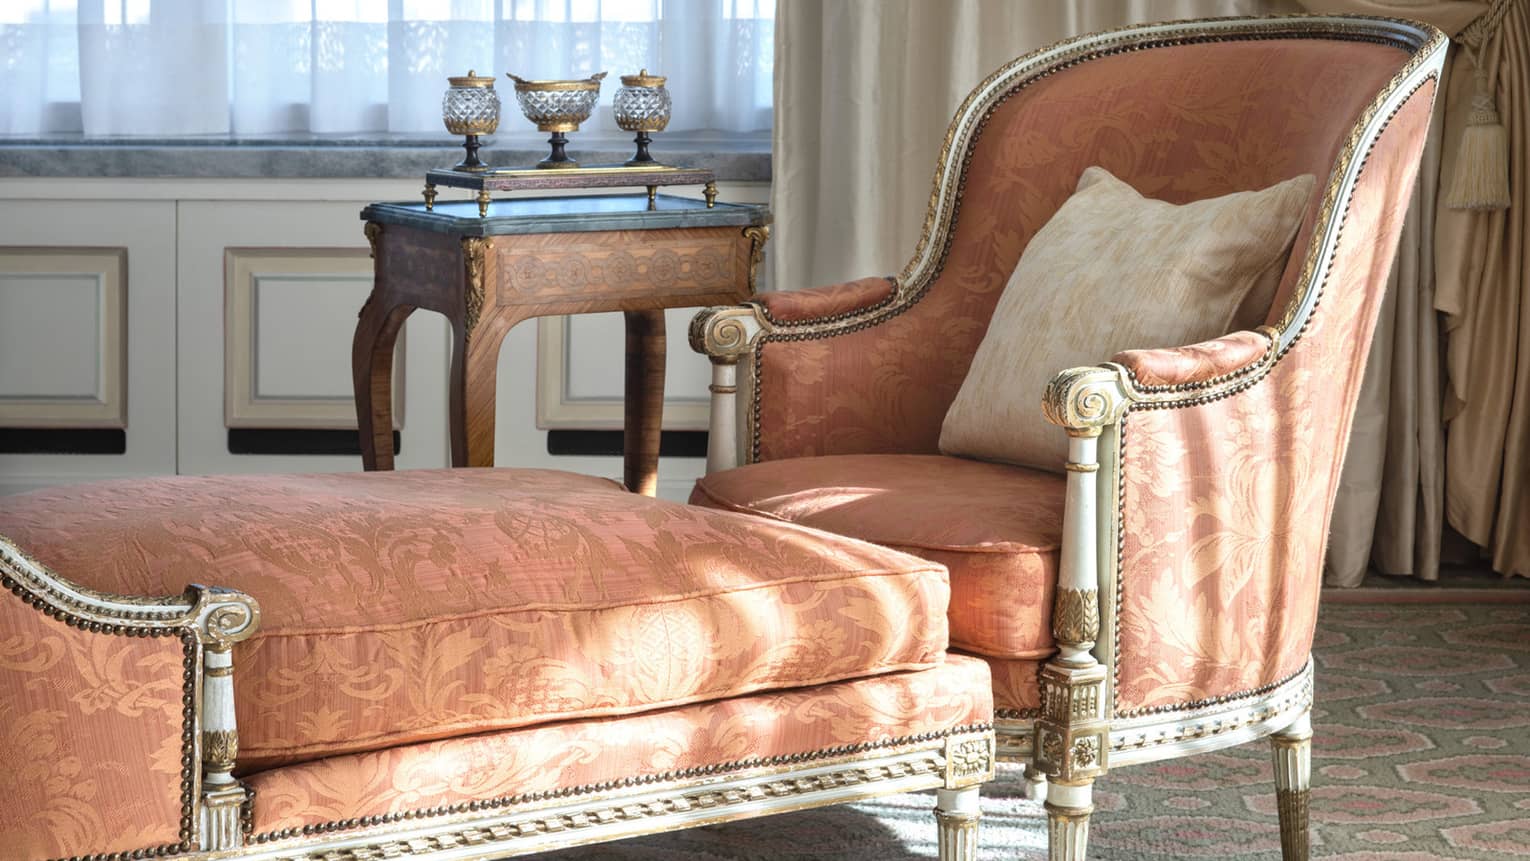 Close-up of formal orange chaise longue and side table beside curtained window